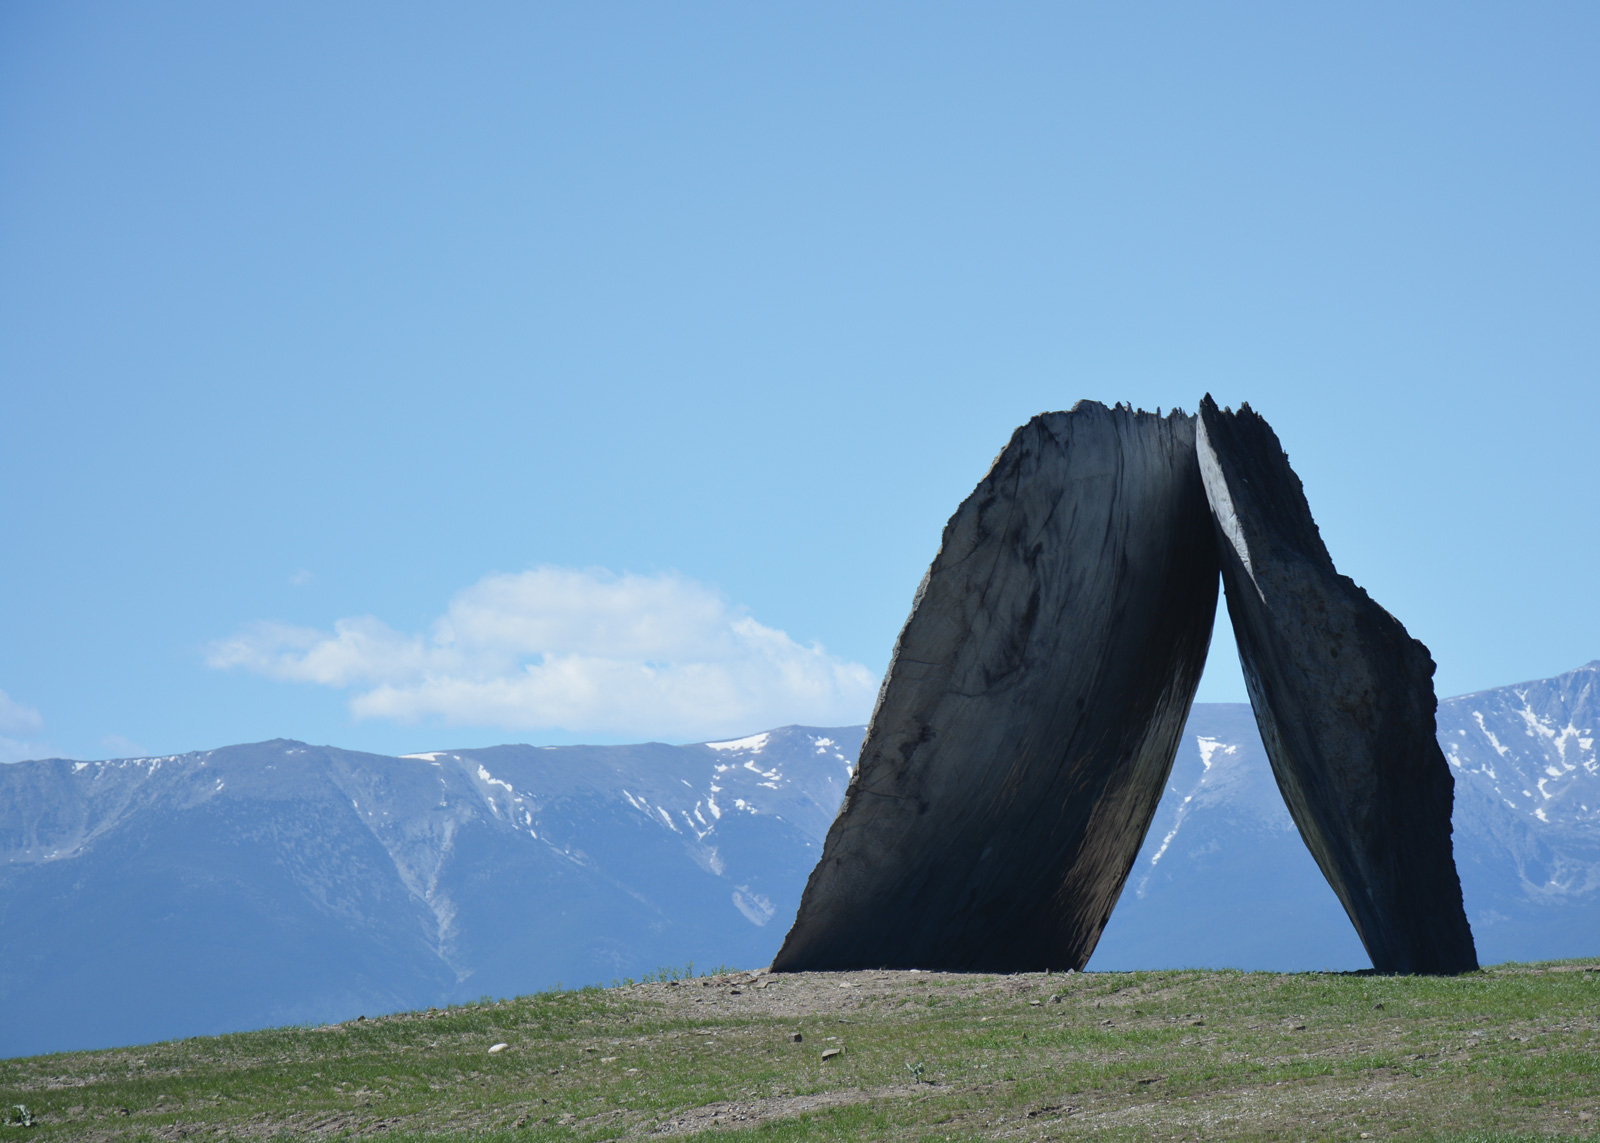 Tippet Rise